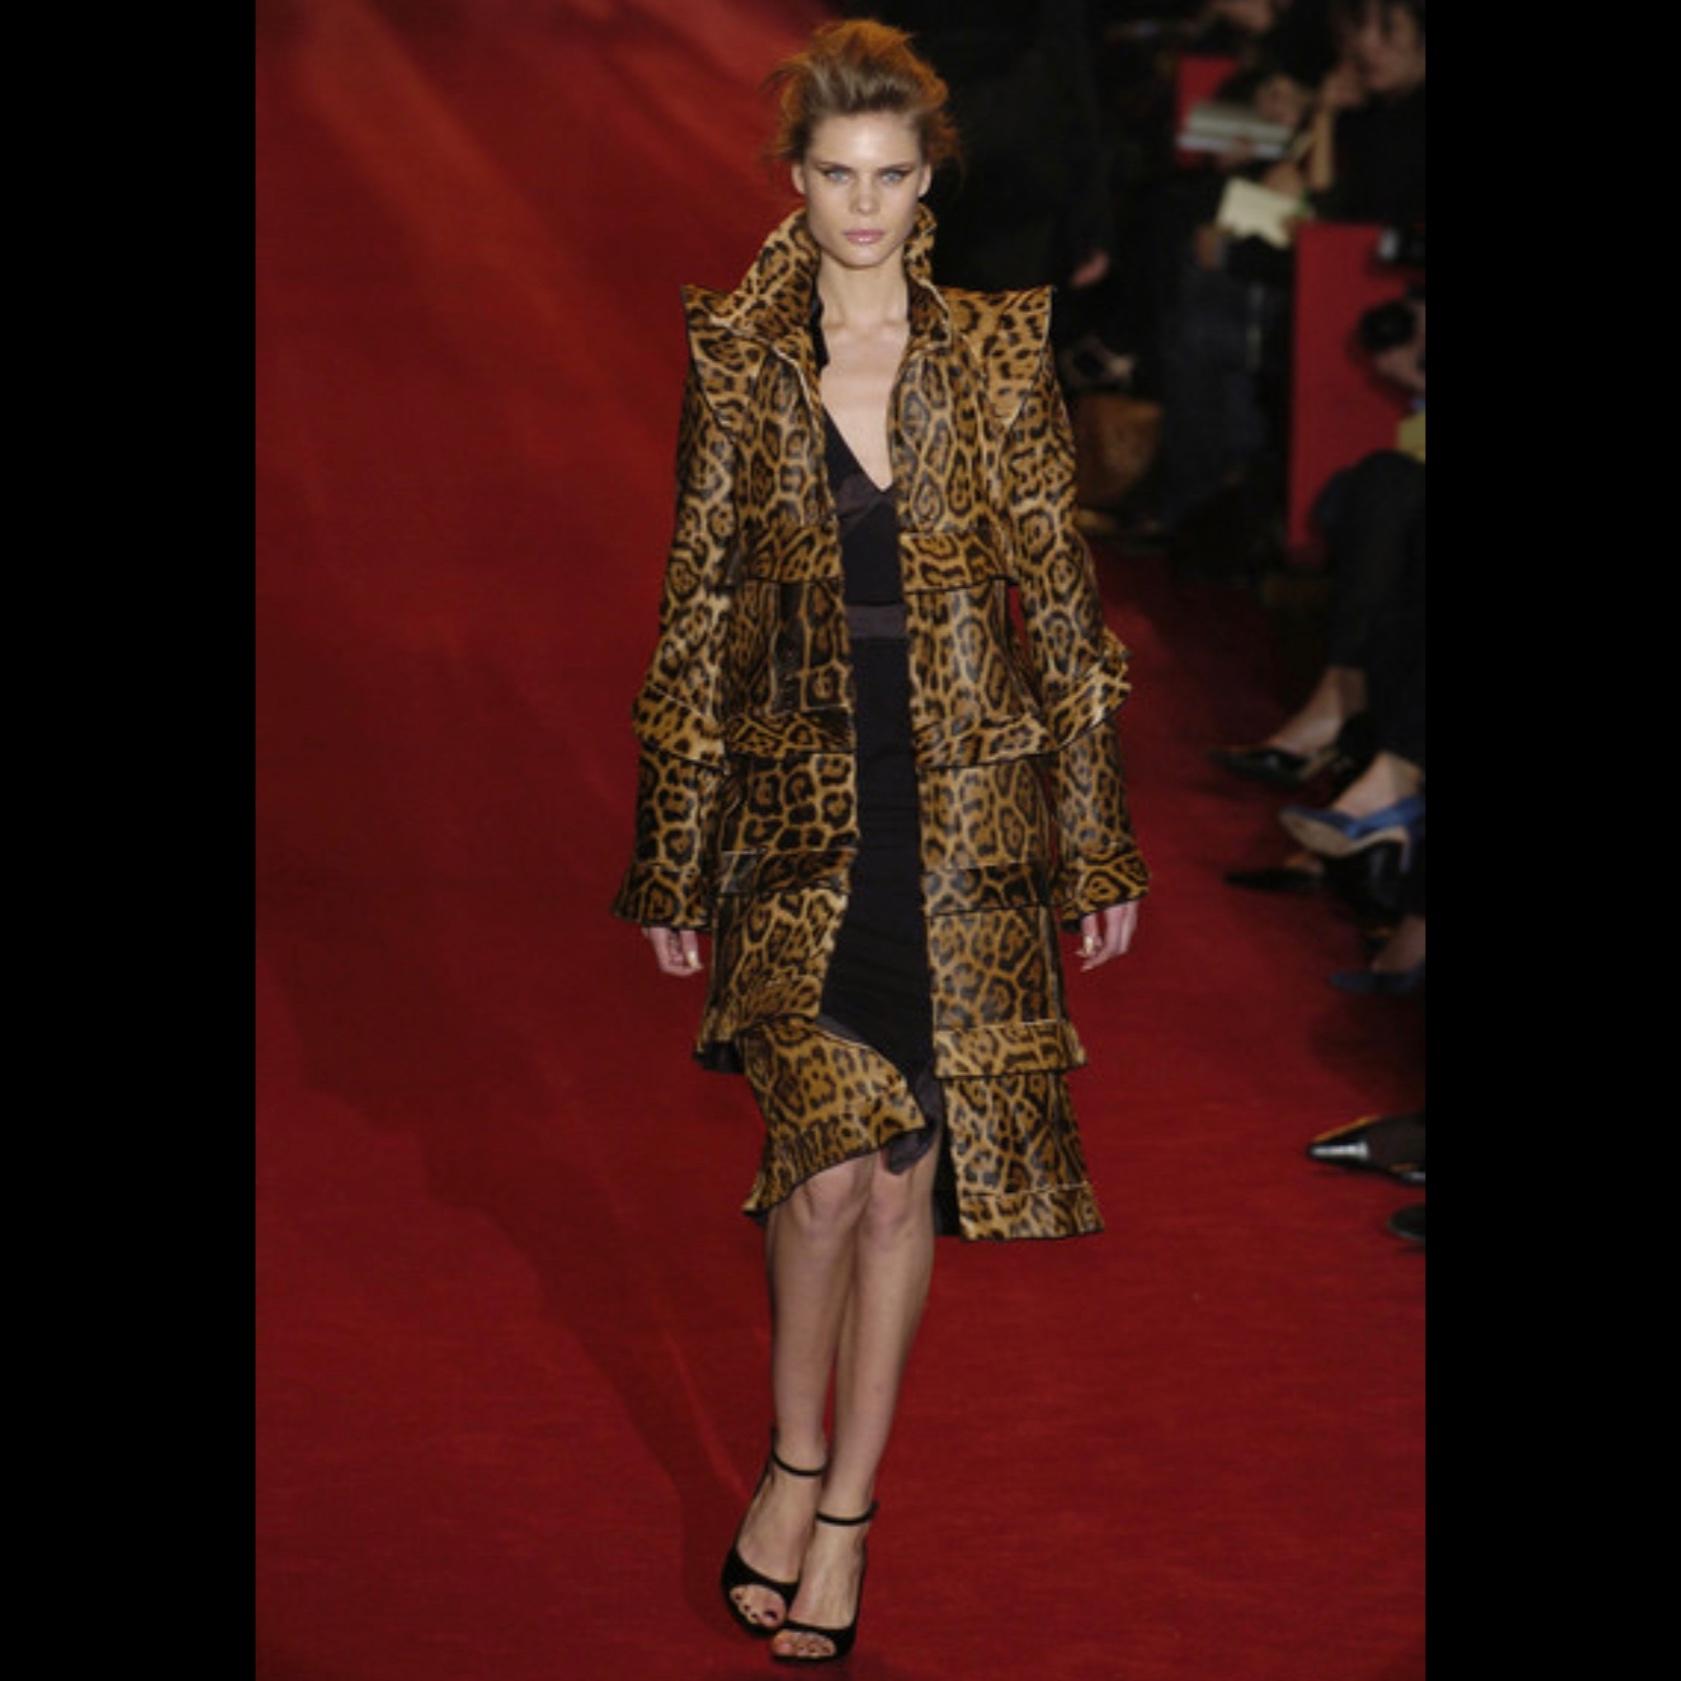 Presenting the most incredible leopard print pony hair Yves Saint Laurent Rive Gauche pagoda coat, designed by Tom Ford. From the Fall/Winter 2004 collection, this jacket debuted on the season's runway as part of look 19 modeled by Adina Fohlin.